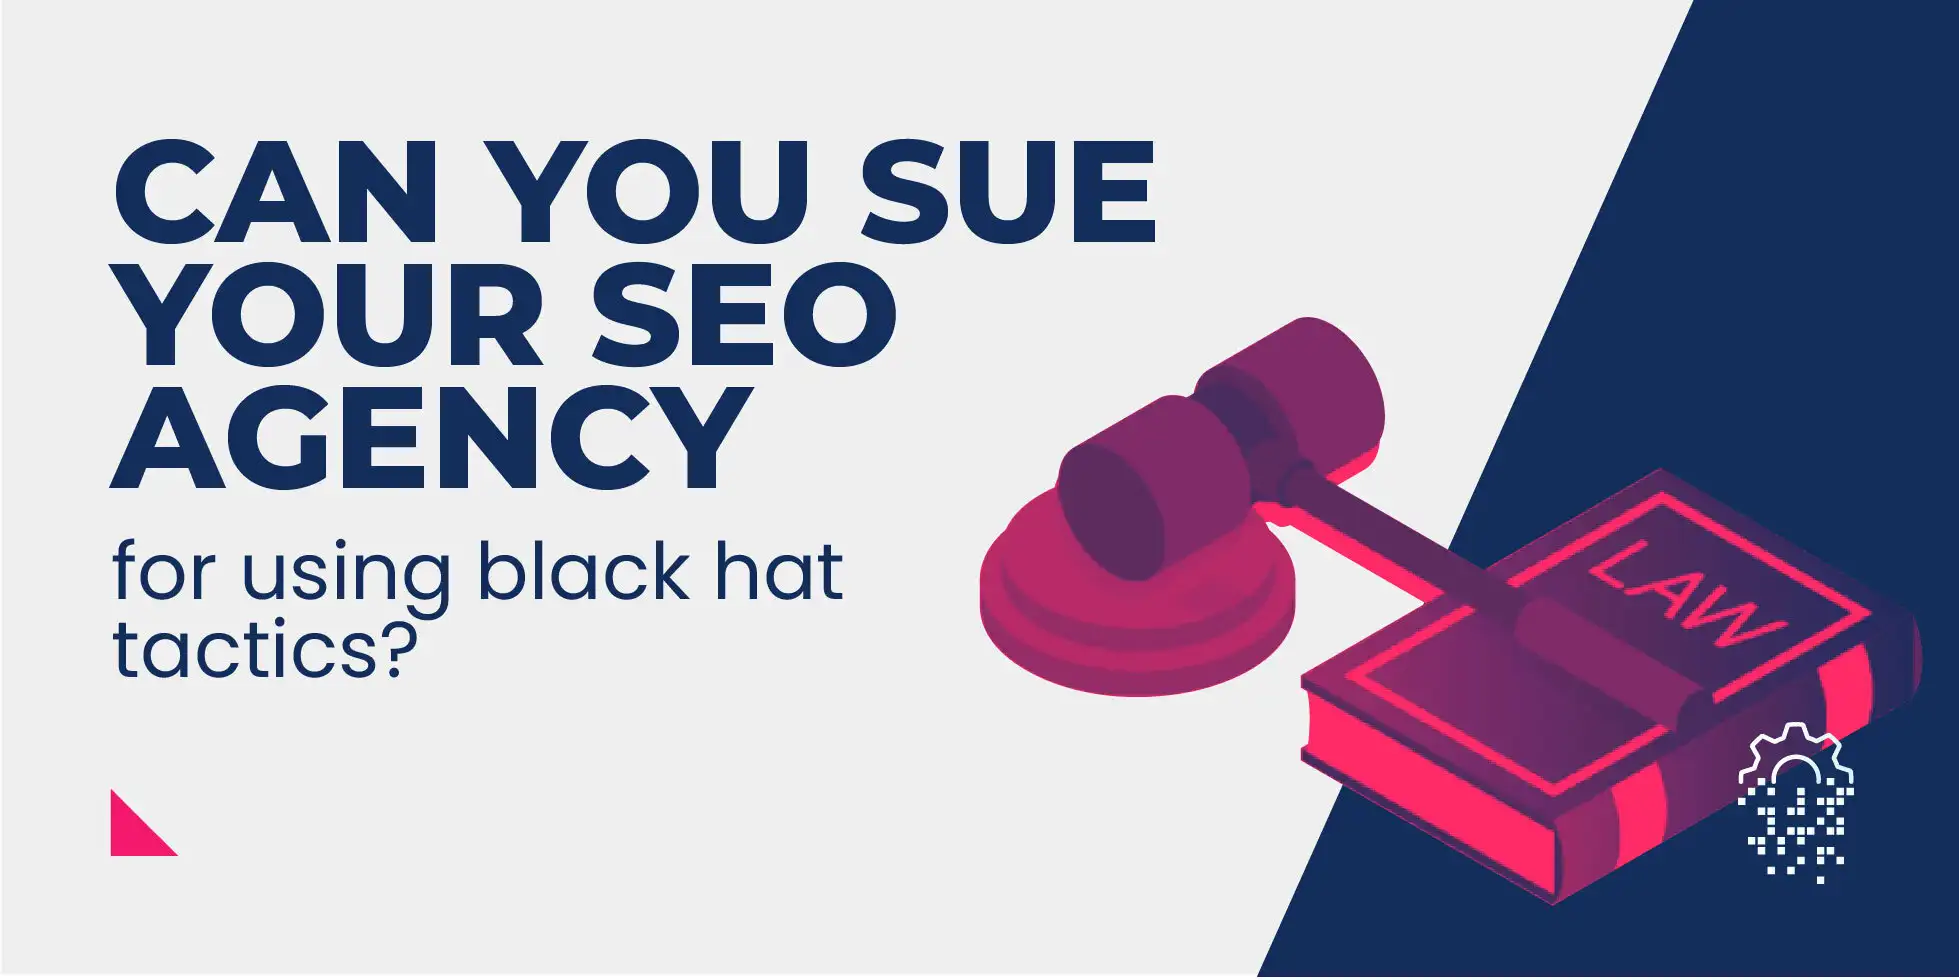 Can You Sue Your SEO Agency For Using Black Hat Tactics?